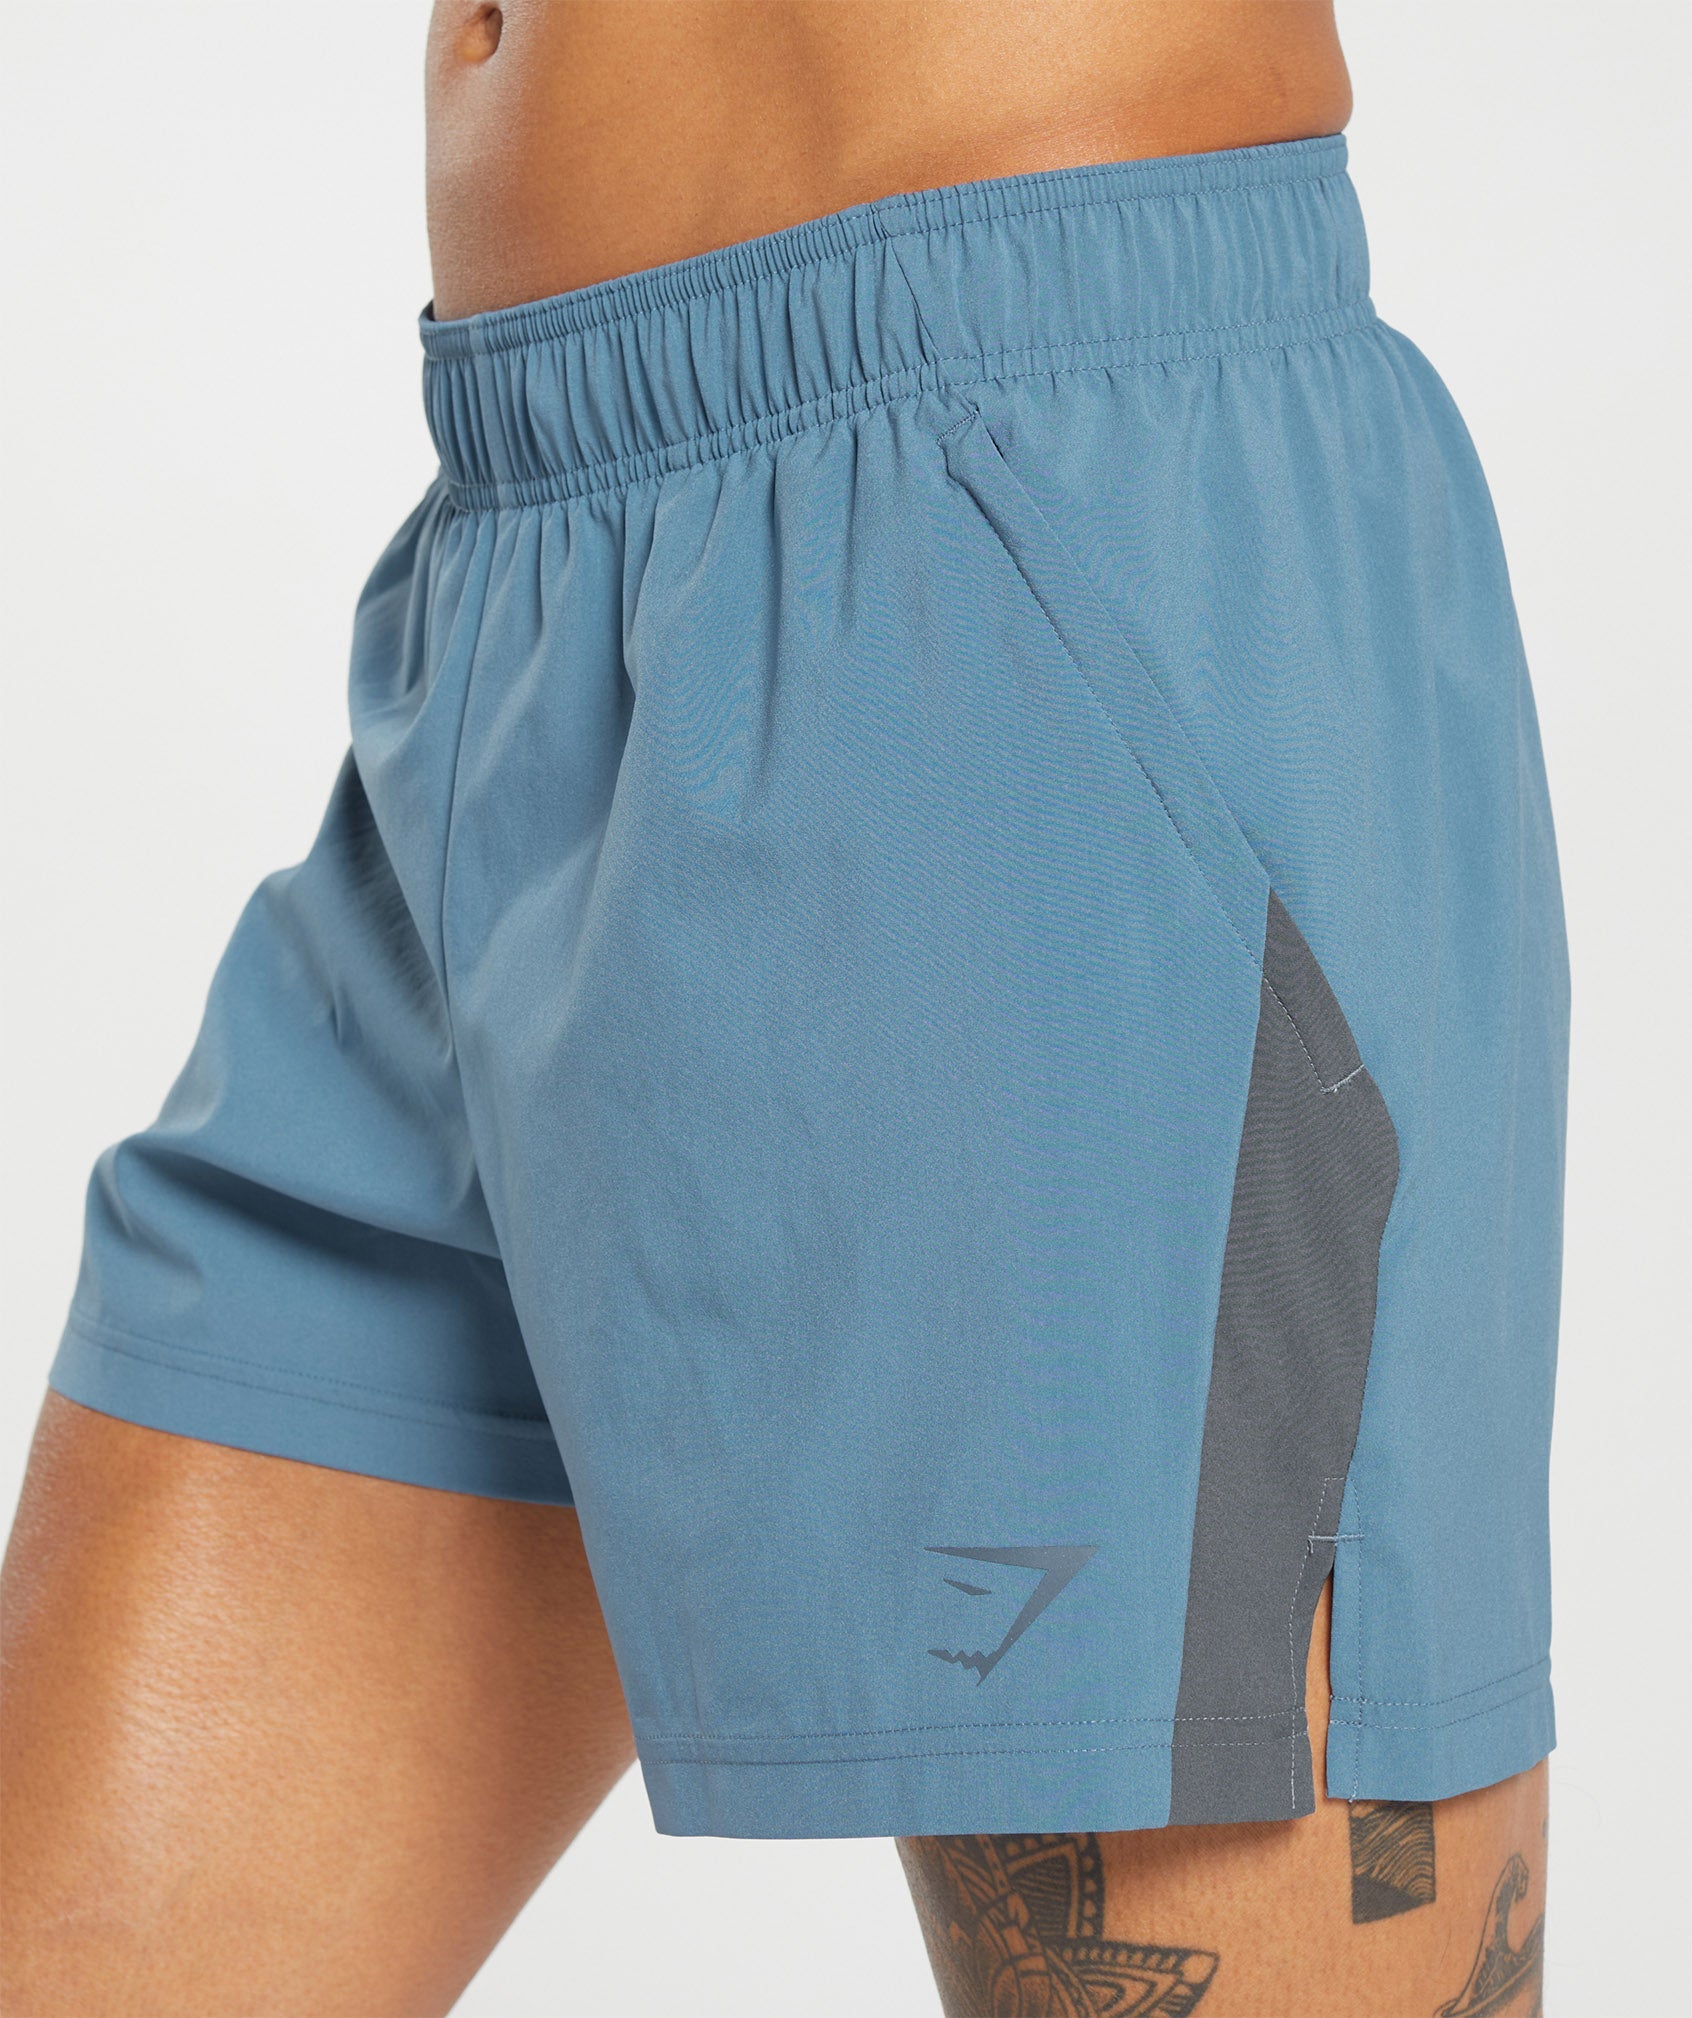 Sport 5" Shorts in Faded Blue/Titanium Blue - view 5